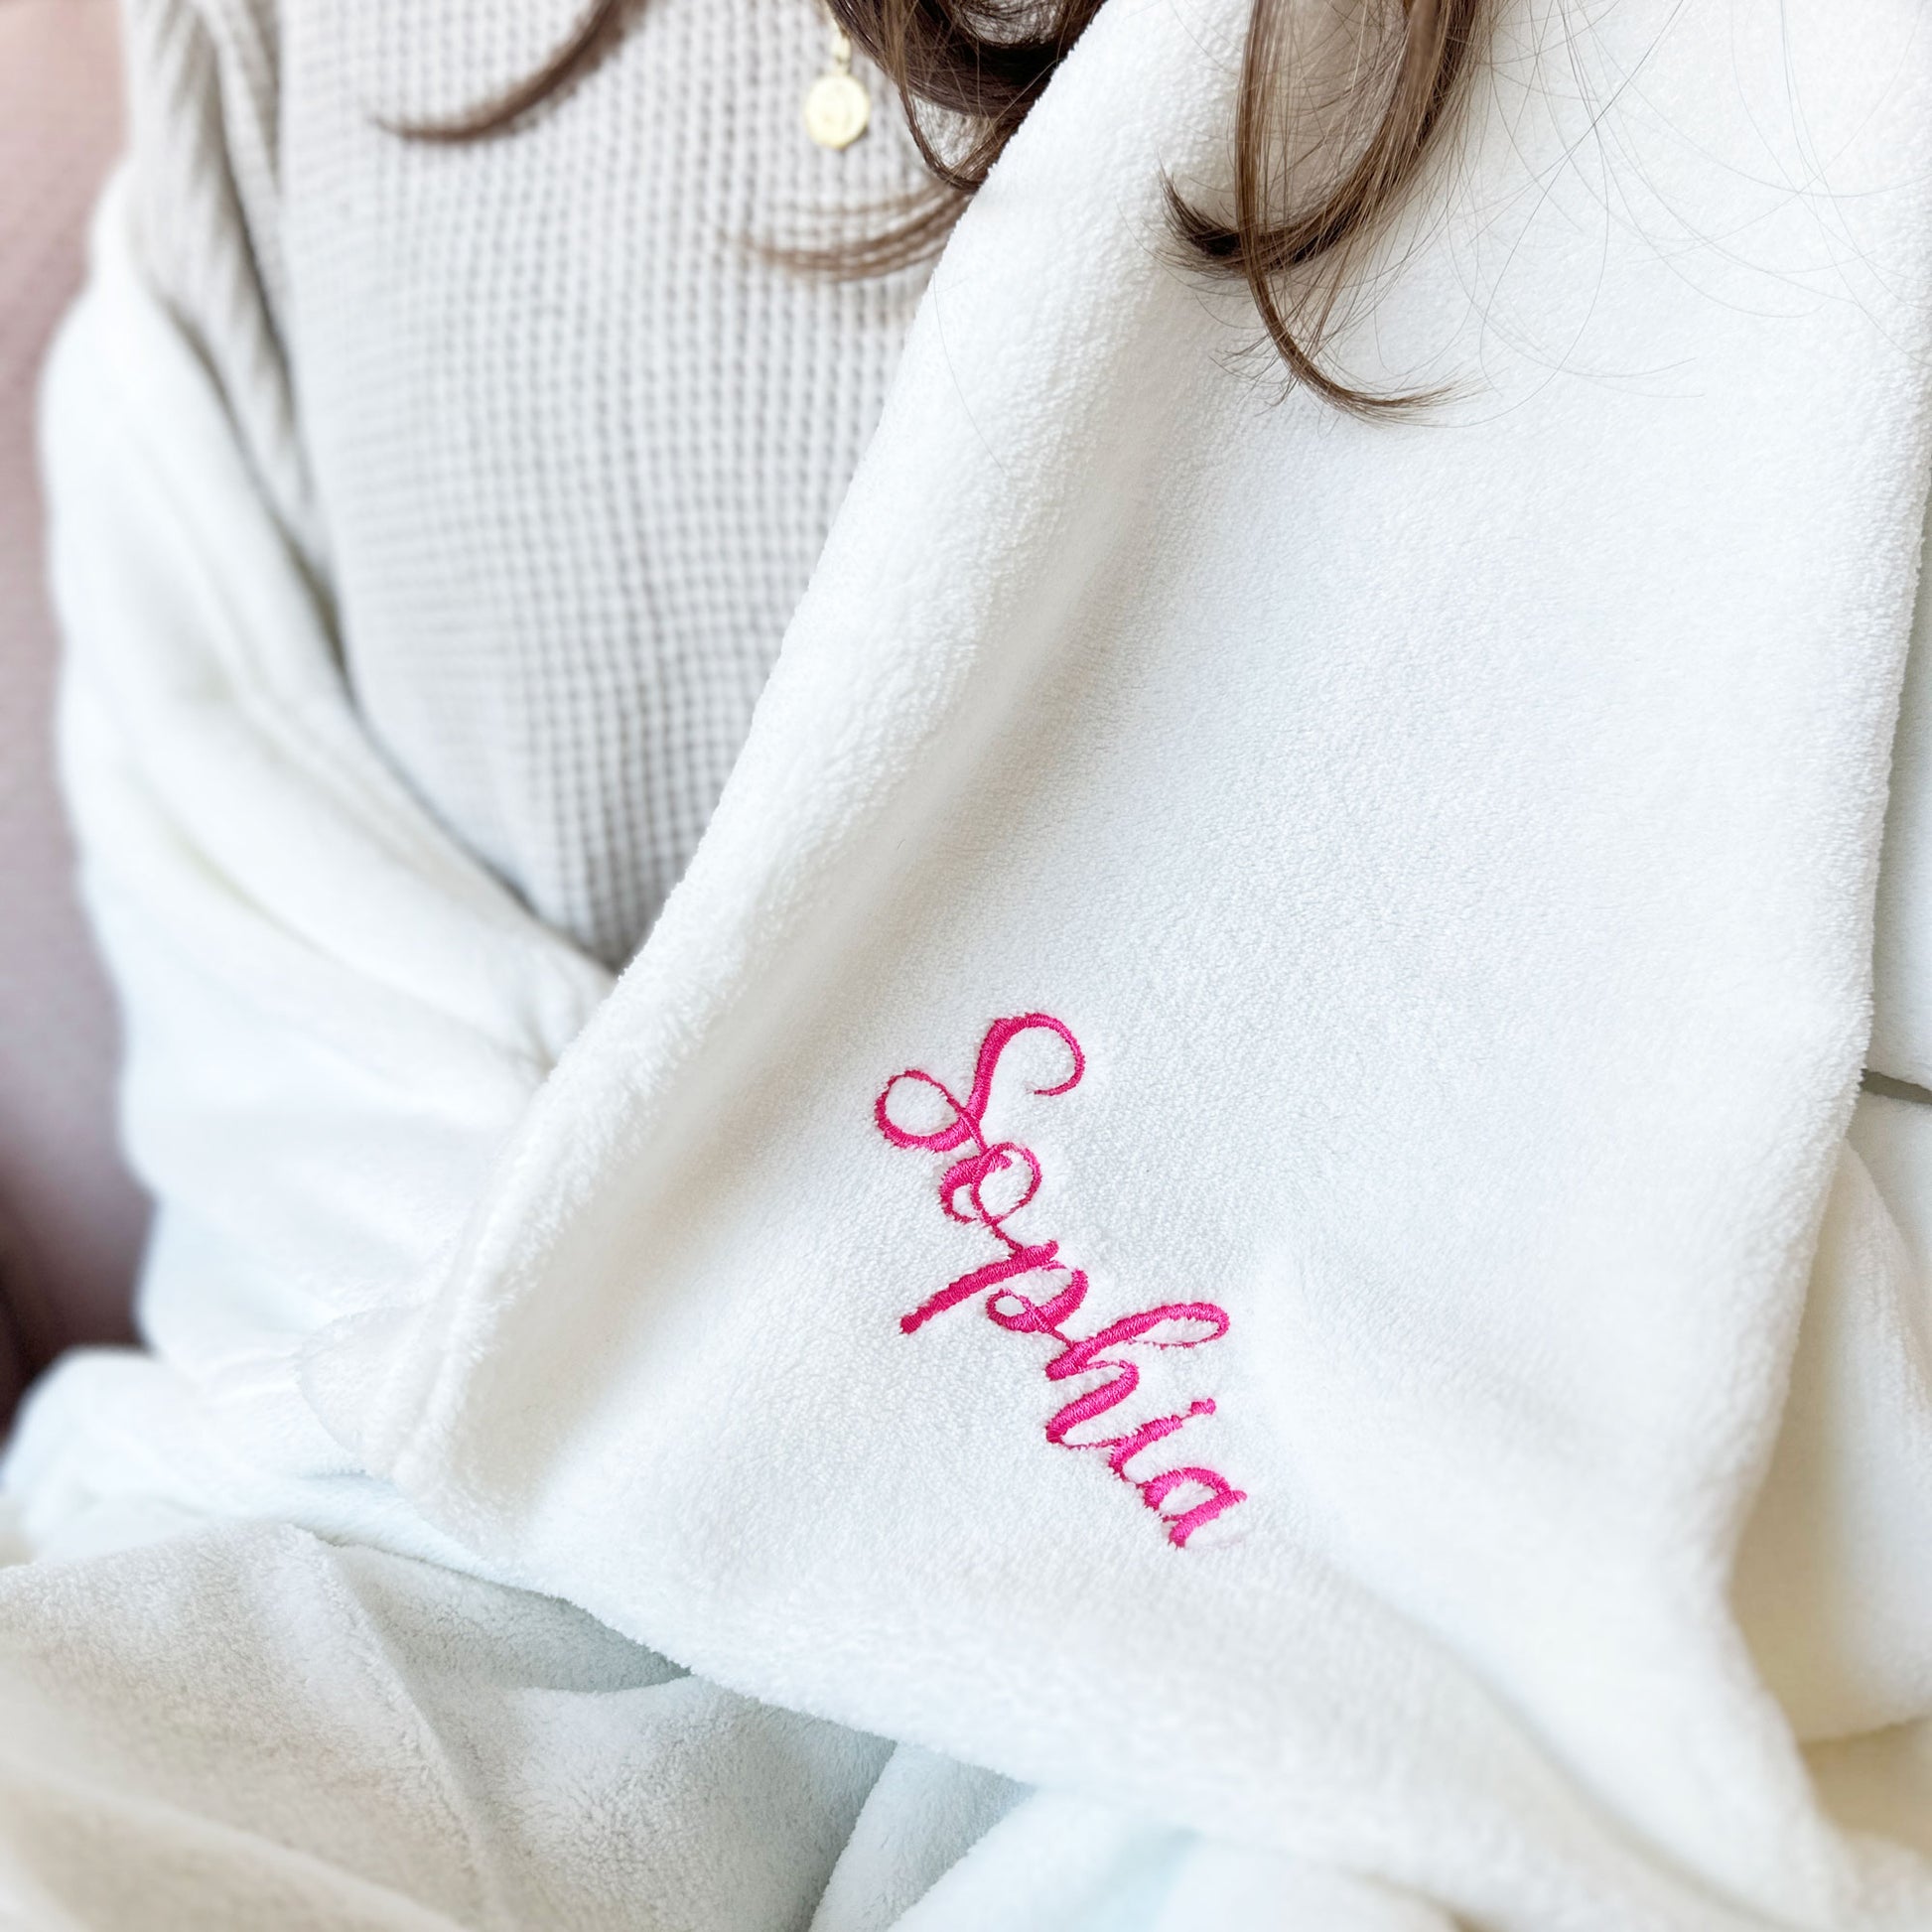 close up of woman wrapped in a white blanket with sophia embroidered on the corner in pink thread.